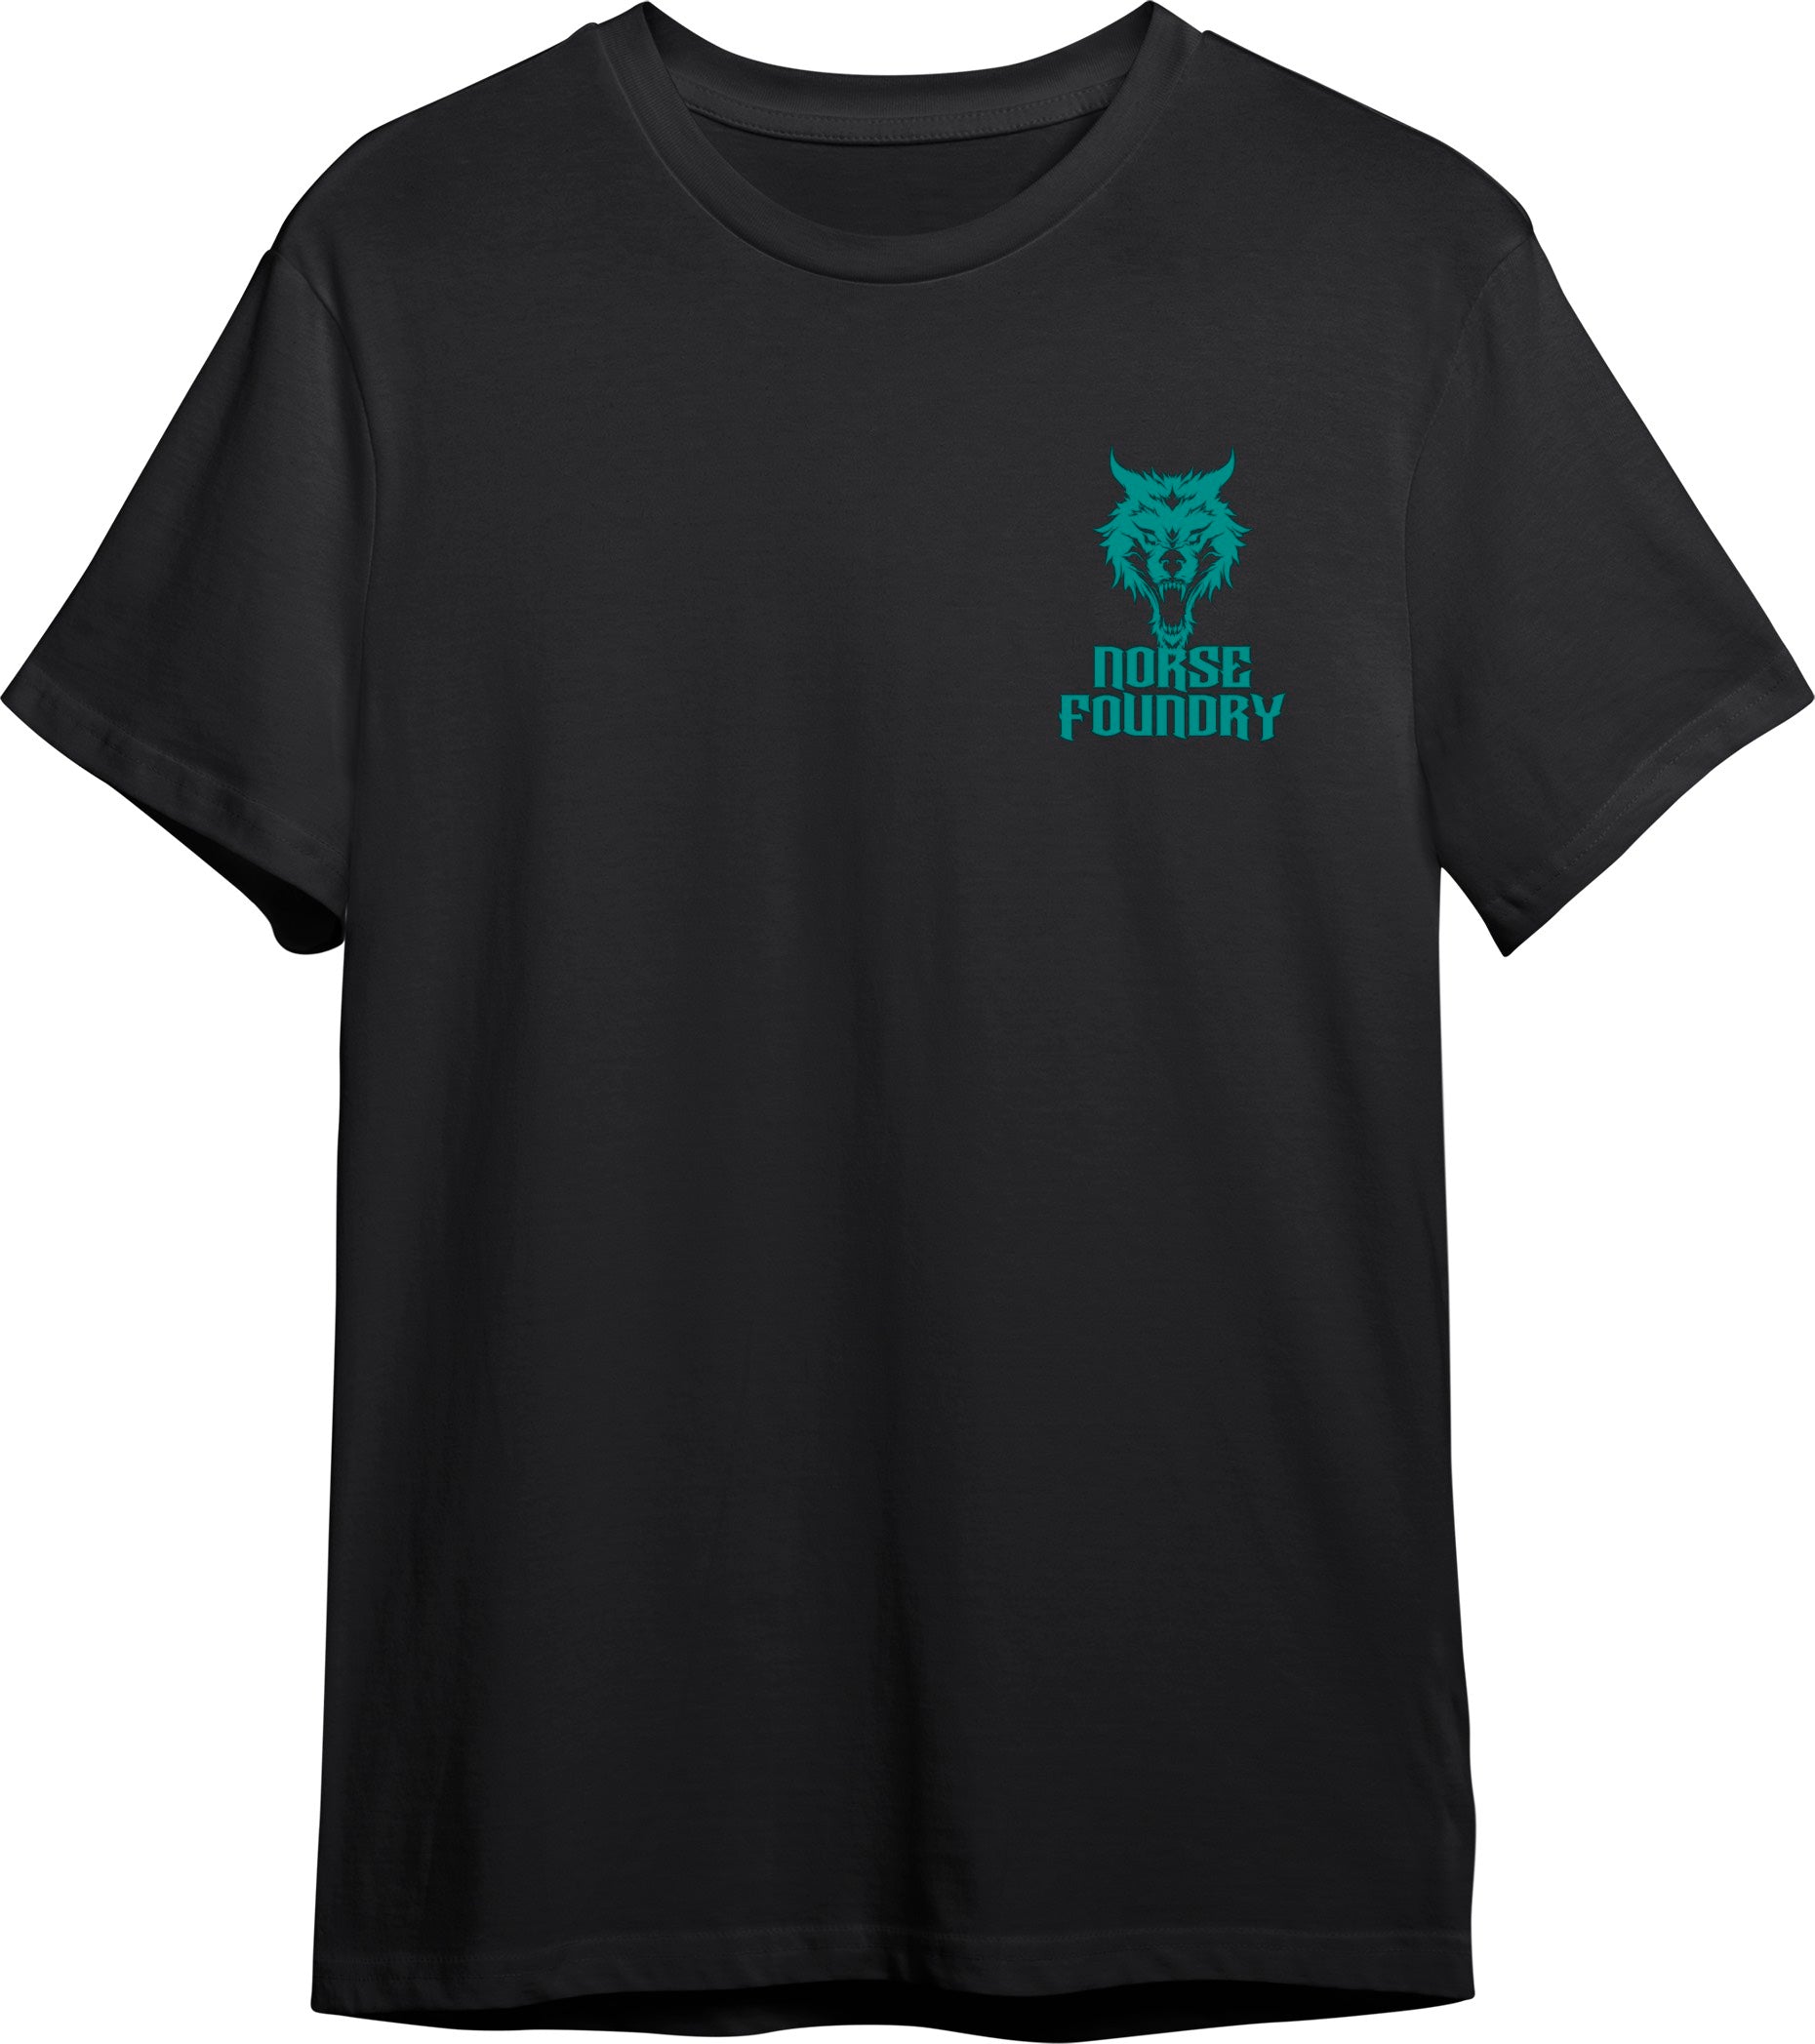 Roll for Adventure - Charcoal with Teal Next Level T-Shirt